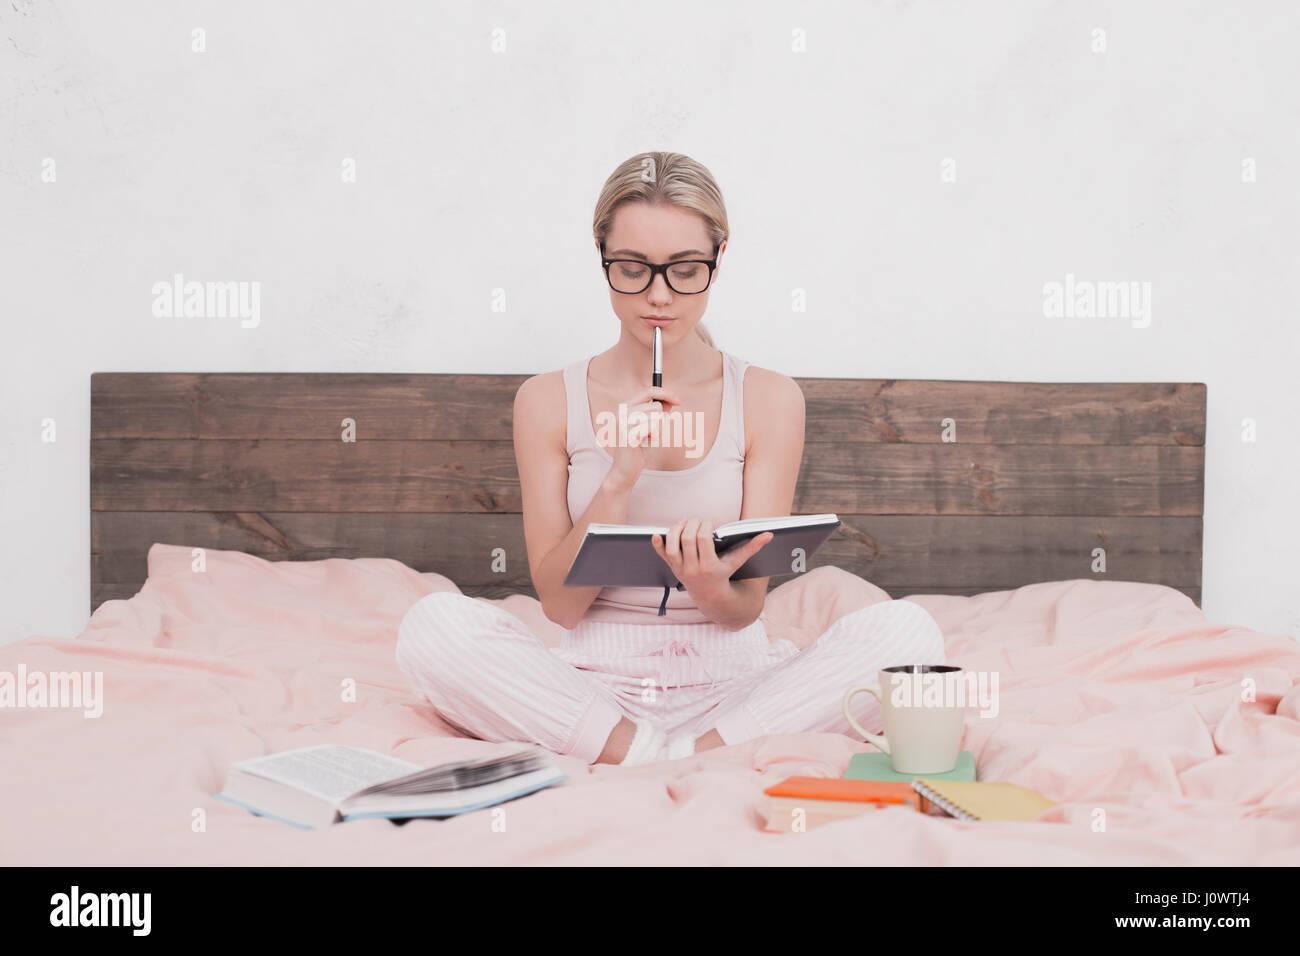 Young Woman Taking Notes Concept Stock Photo